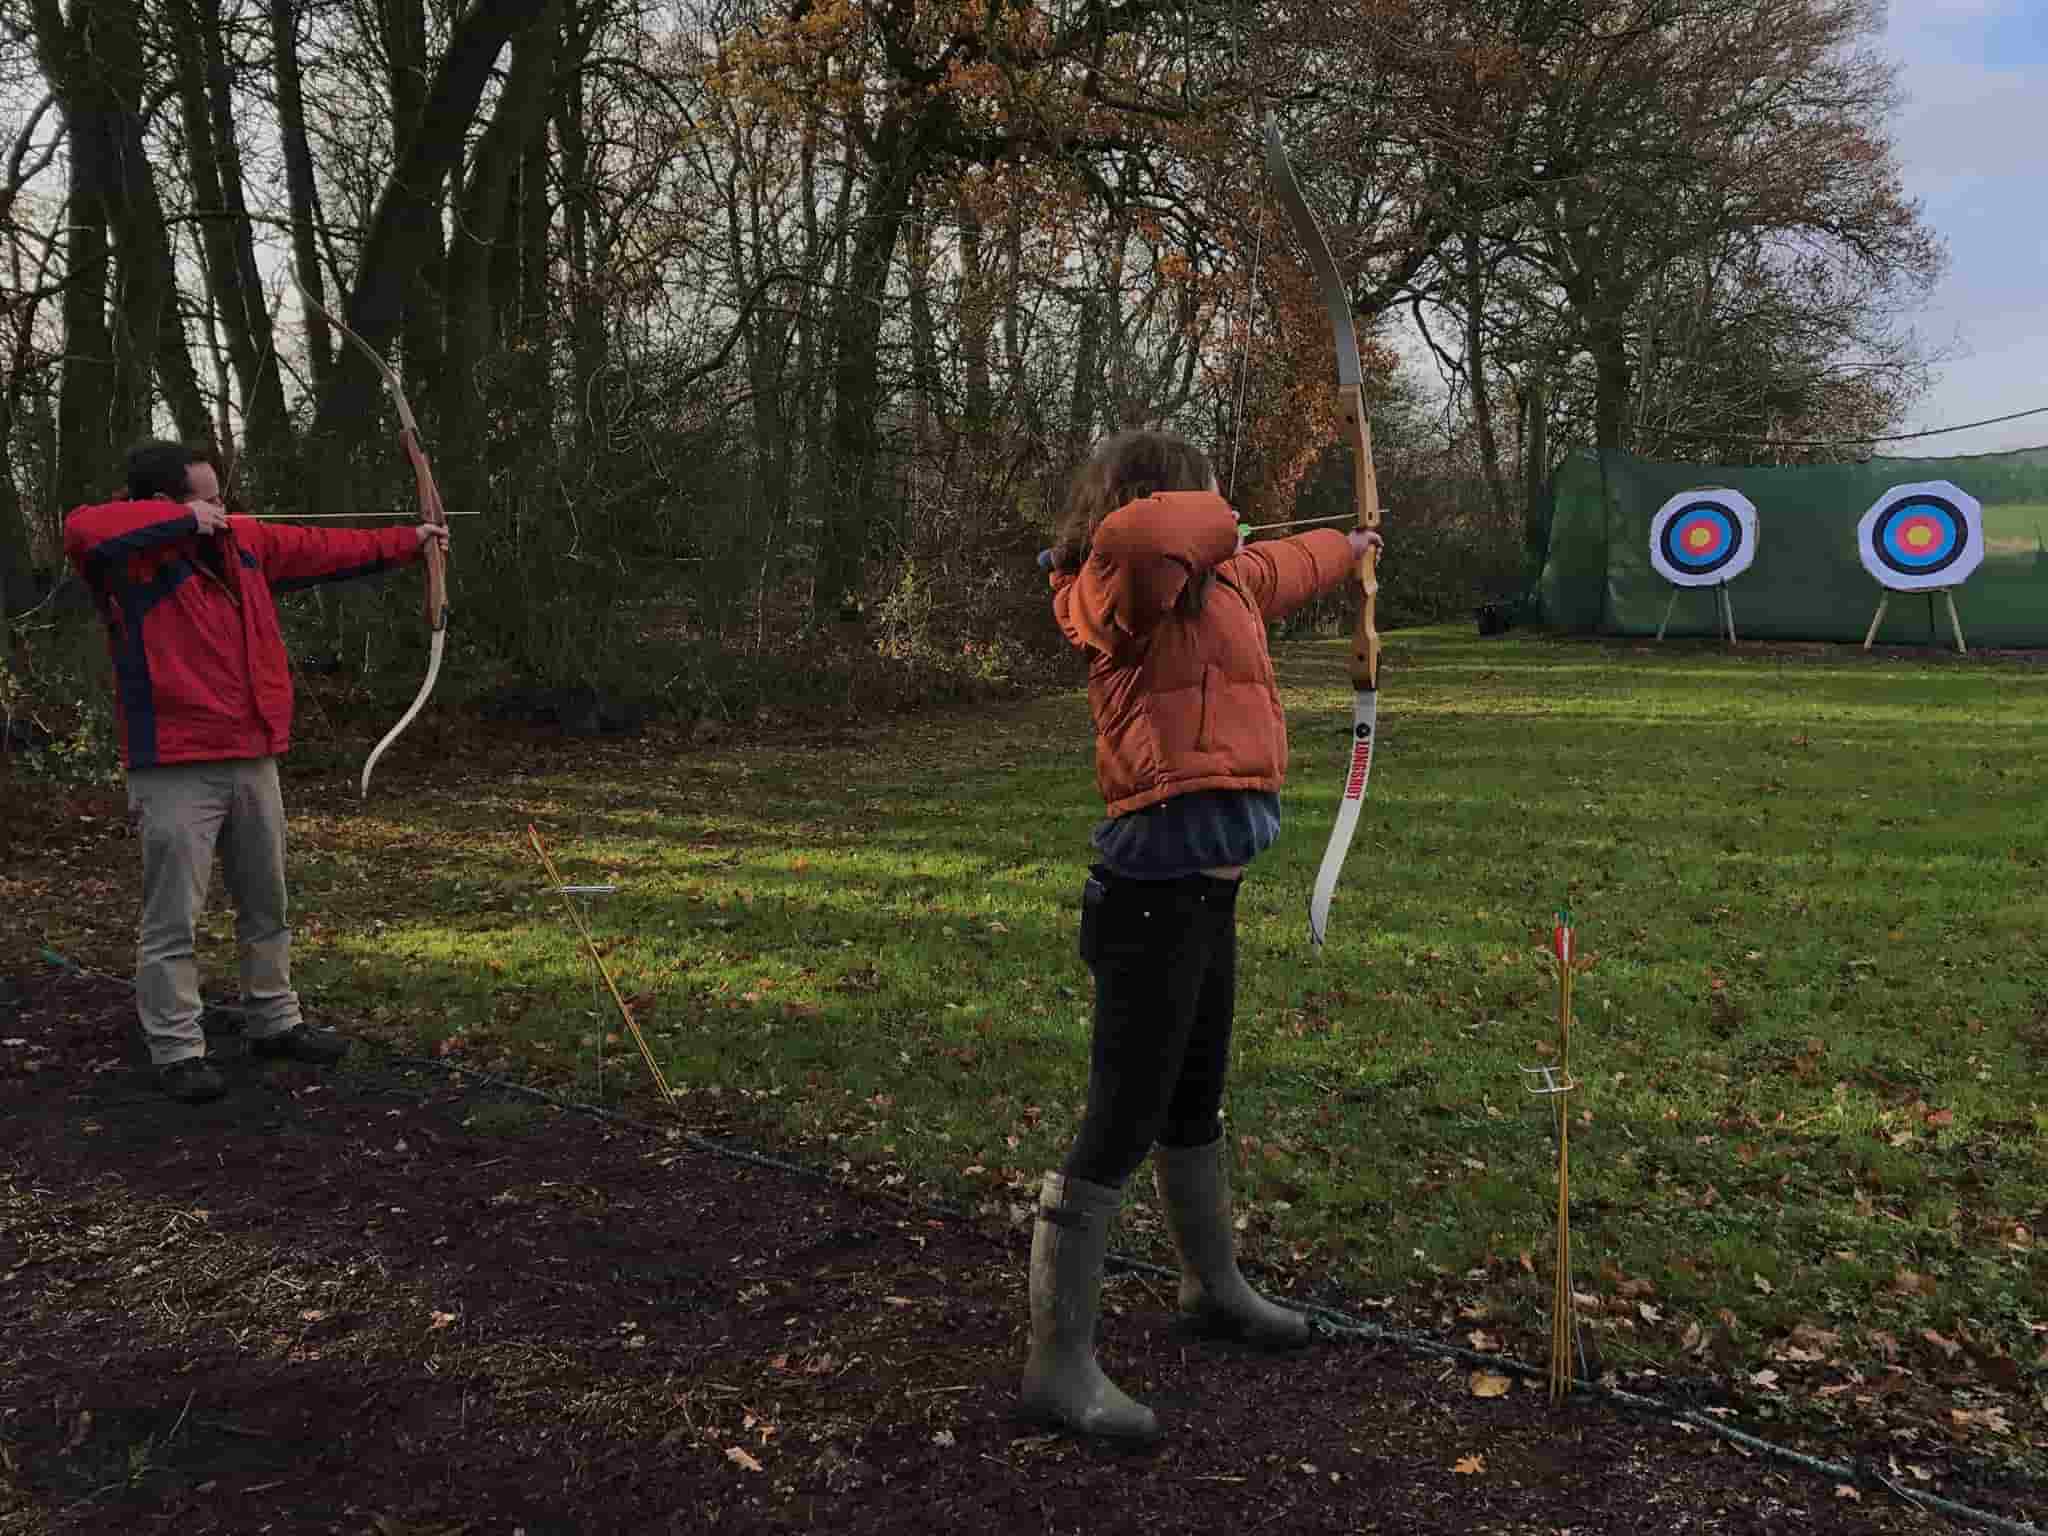 Happy Valentines day; two people holding a bow & arrow and aiming for the bullseye.